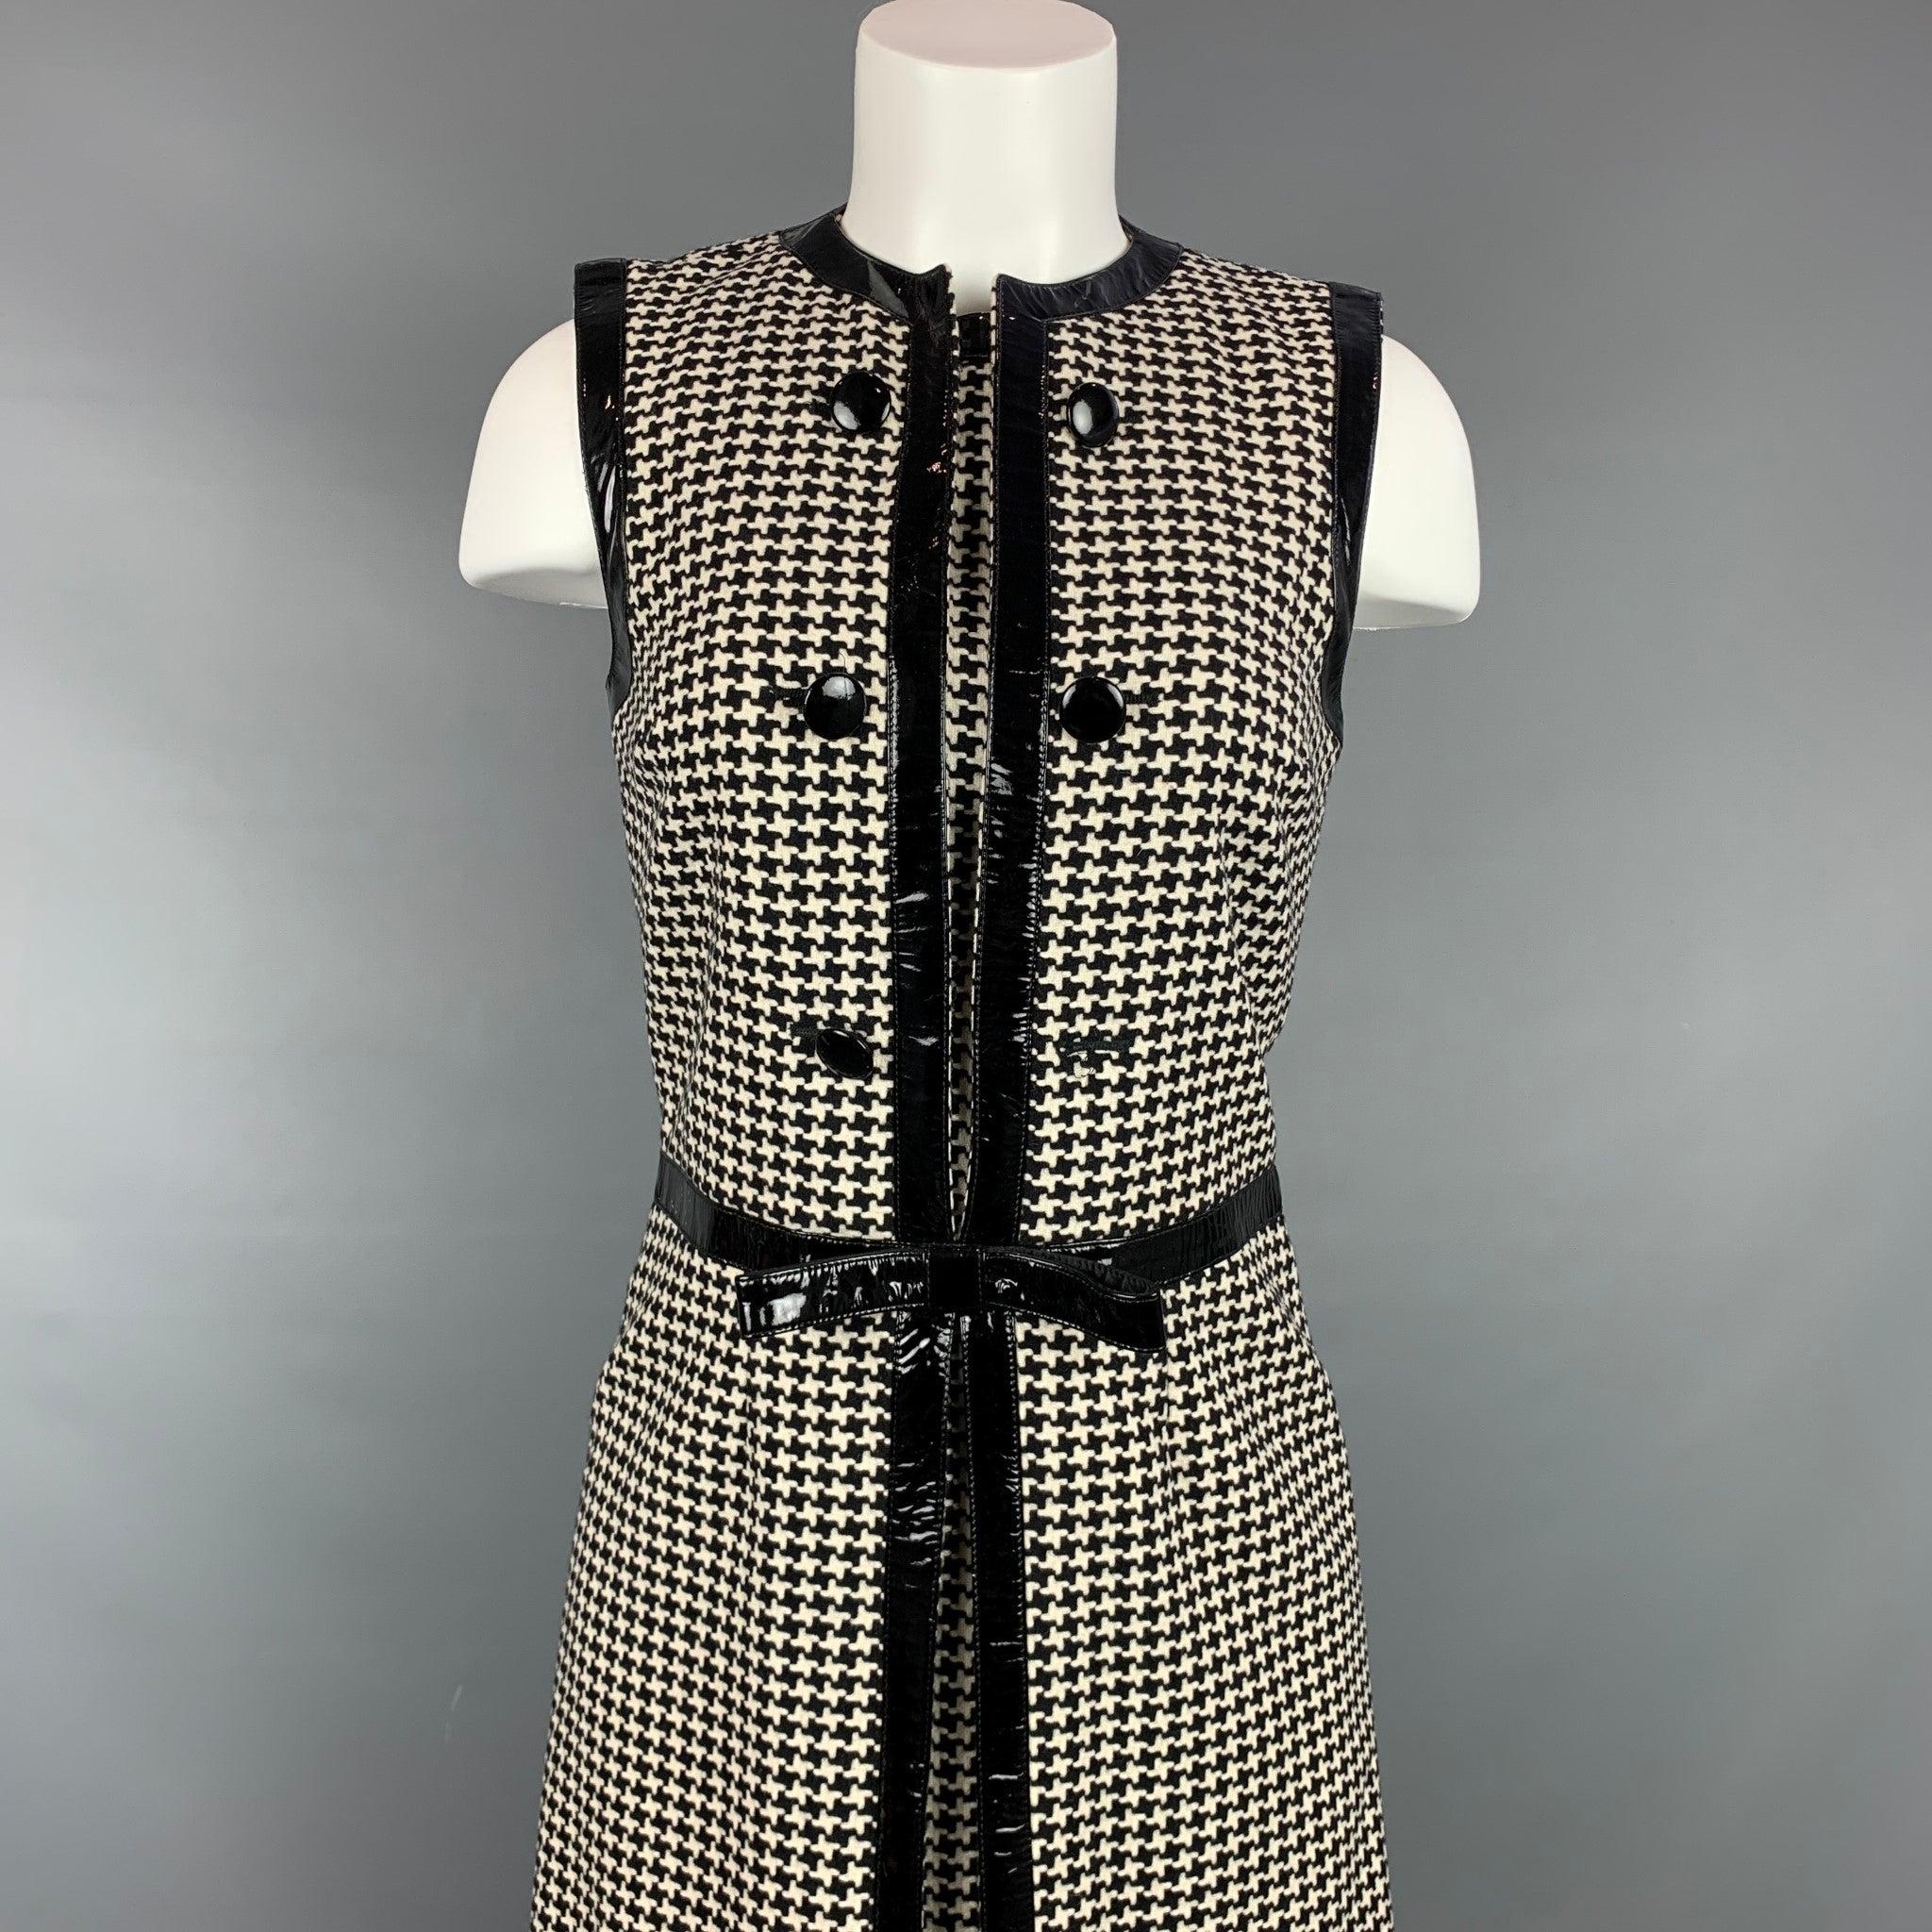 Vintage CHRISTIAN DIOR cocktail dress comes in a black & cream houndstooth wool / polyester with a slip liner featuring a bow detail, patent leather trim, collarless, front buttons, and a back zipper closure. Made in Italy.Good
Pre-Owned Condition.